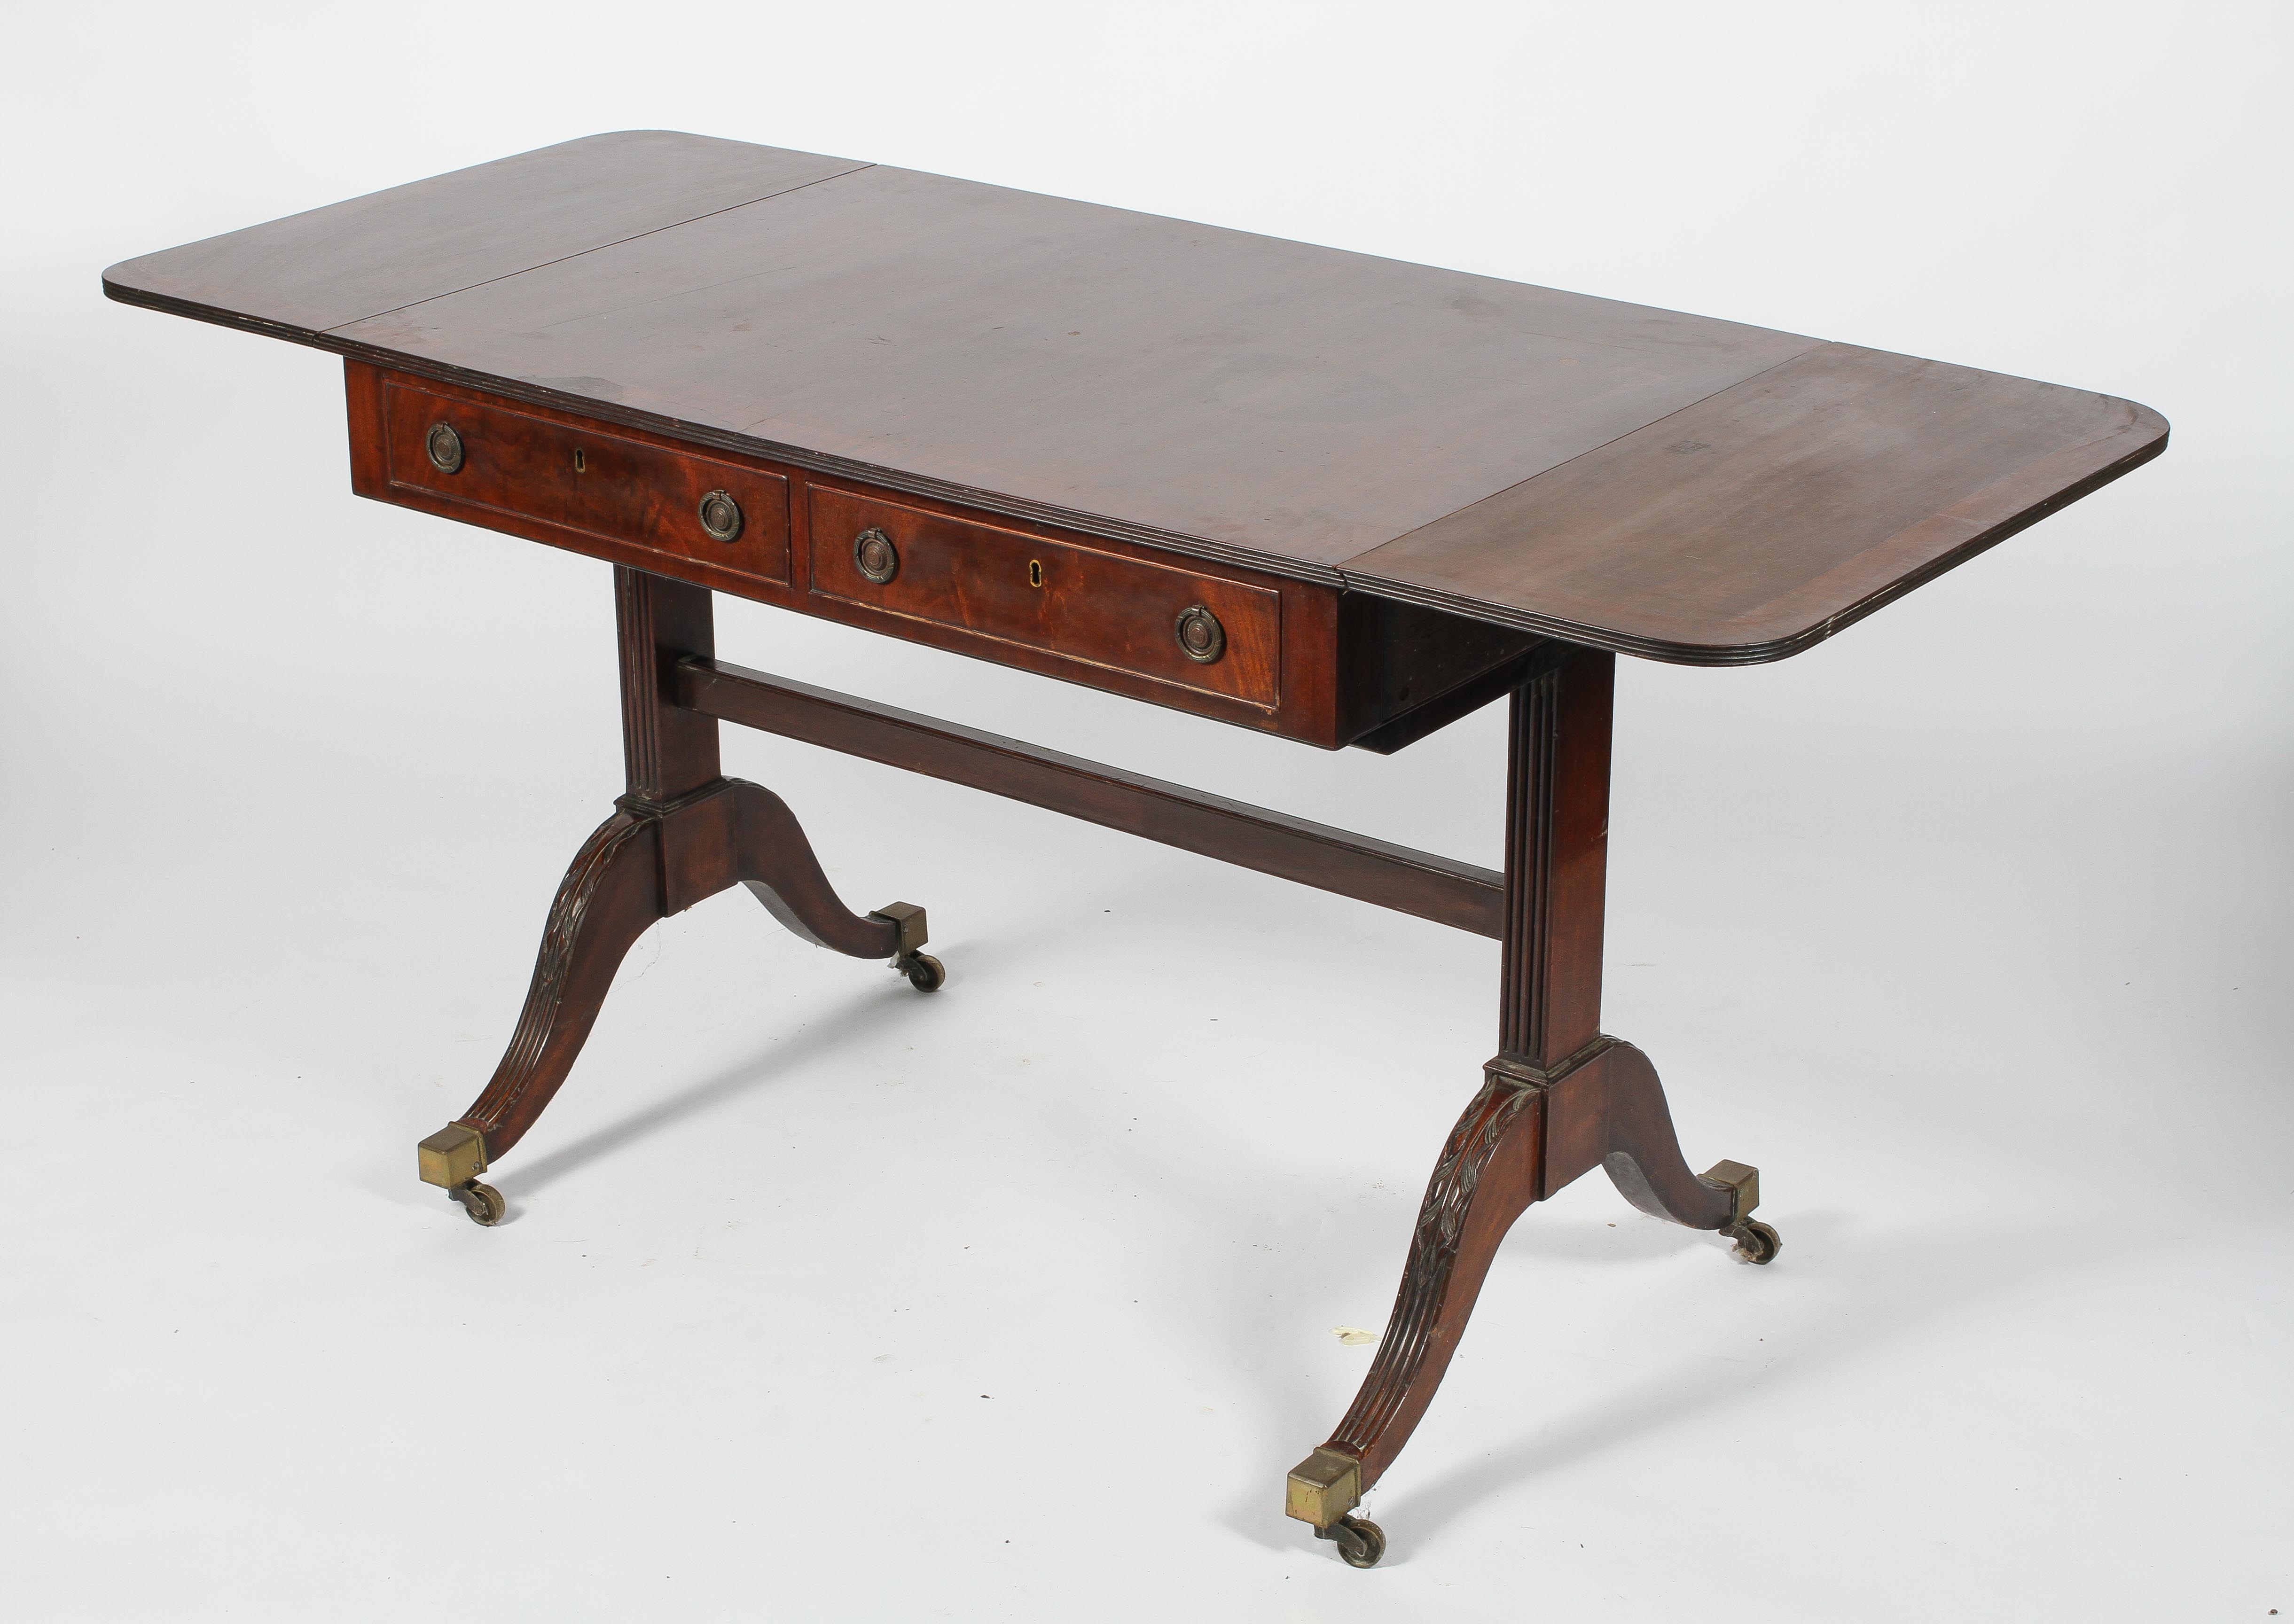 A Regency style mahogany and cross banded sofa table, drop leaves and two true drawers, - Image 2 of 11